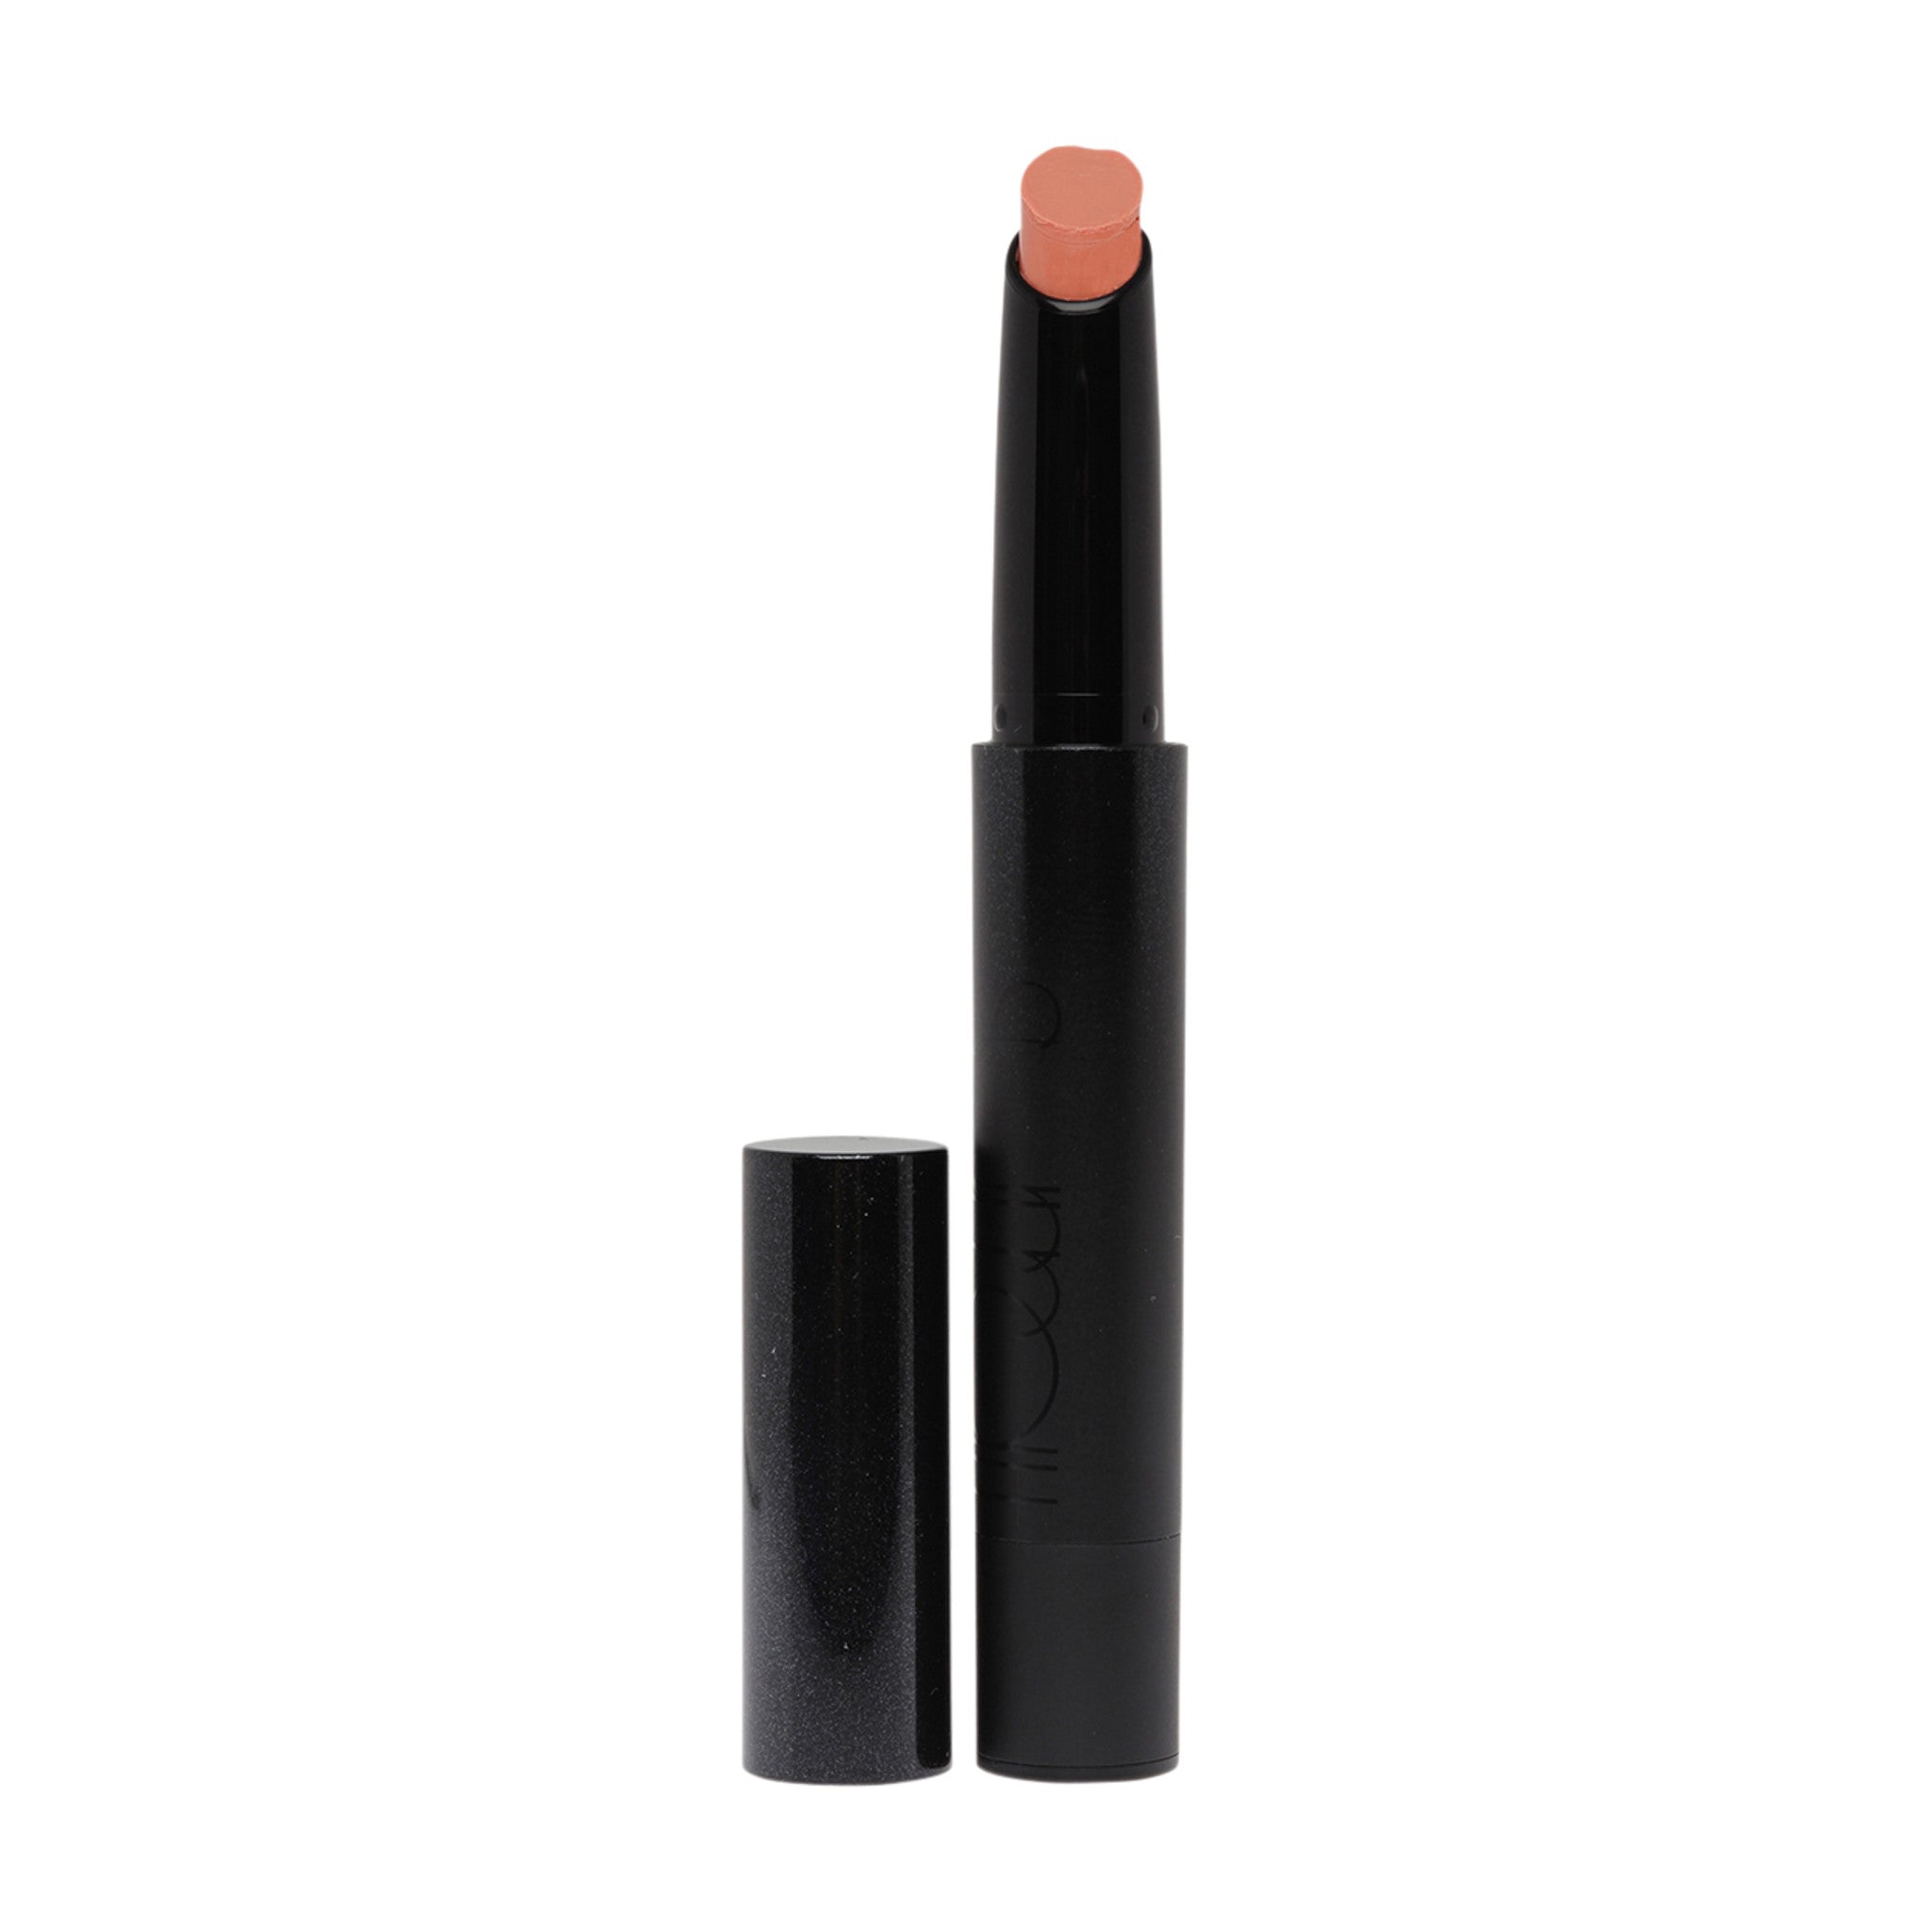 Surratt Lipslique Color/Shade variant: Paramour (Peachy Nude) main image. This product is in the color nude